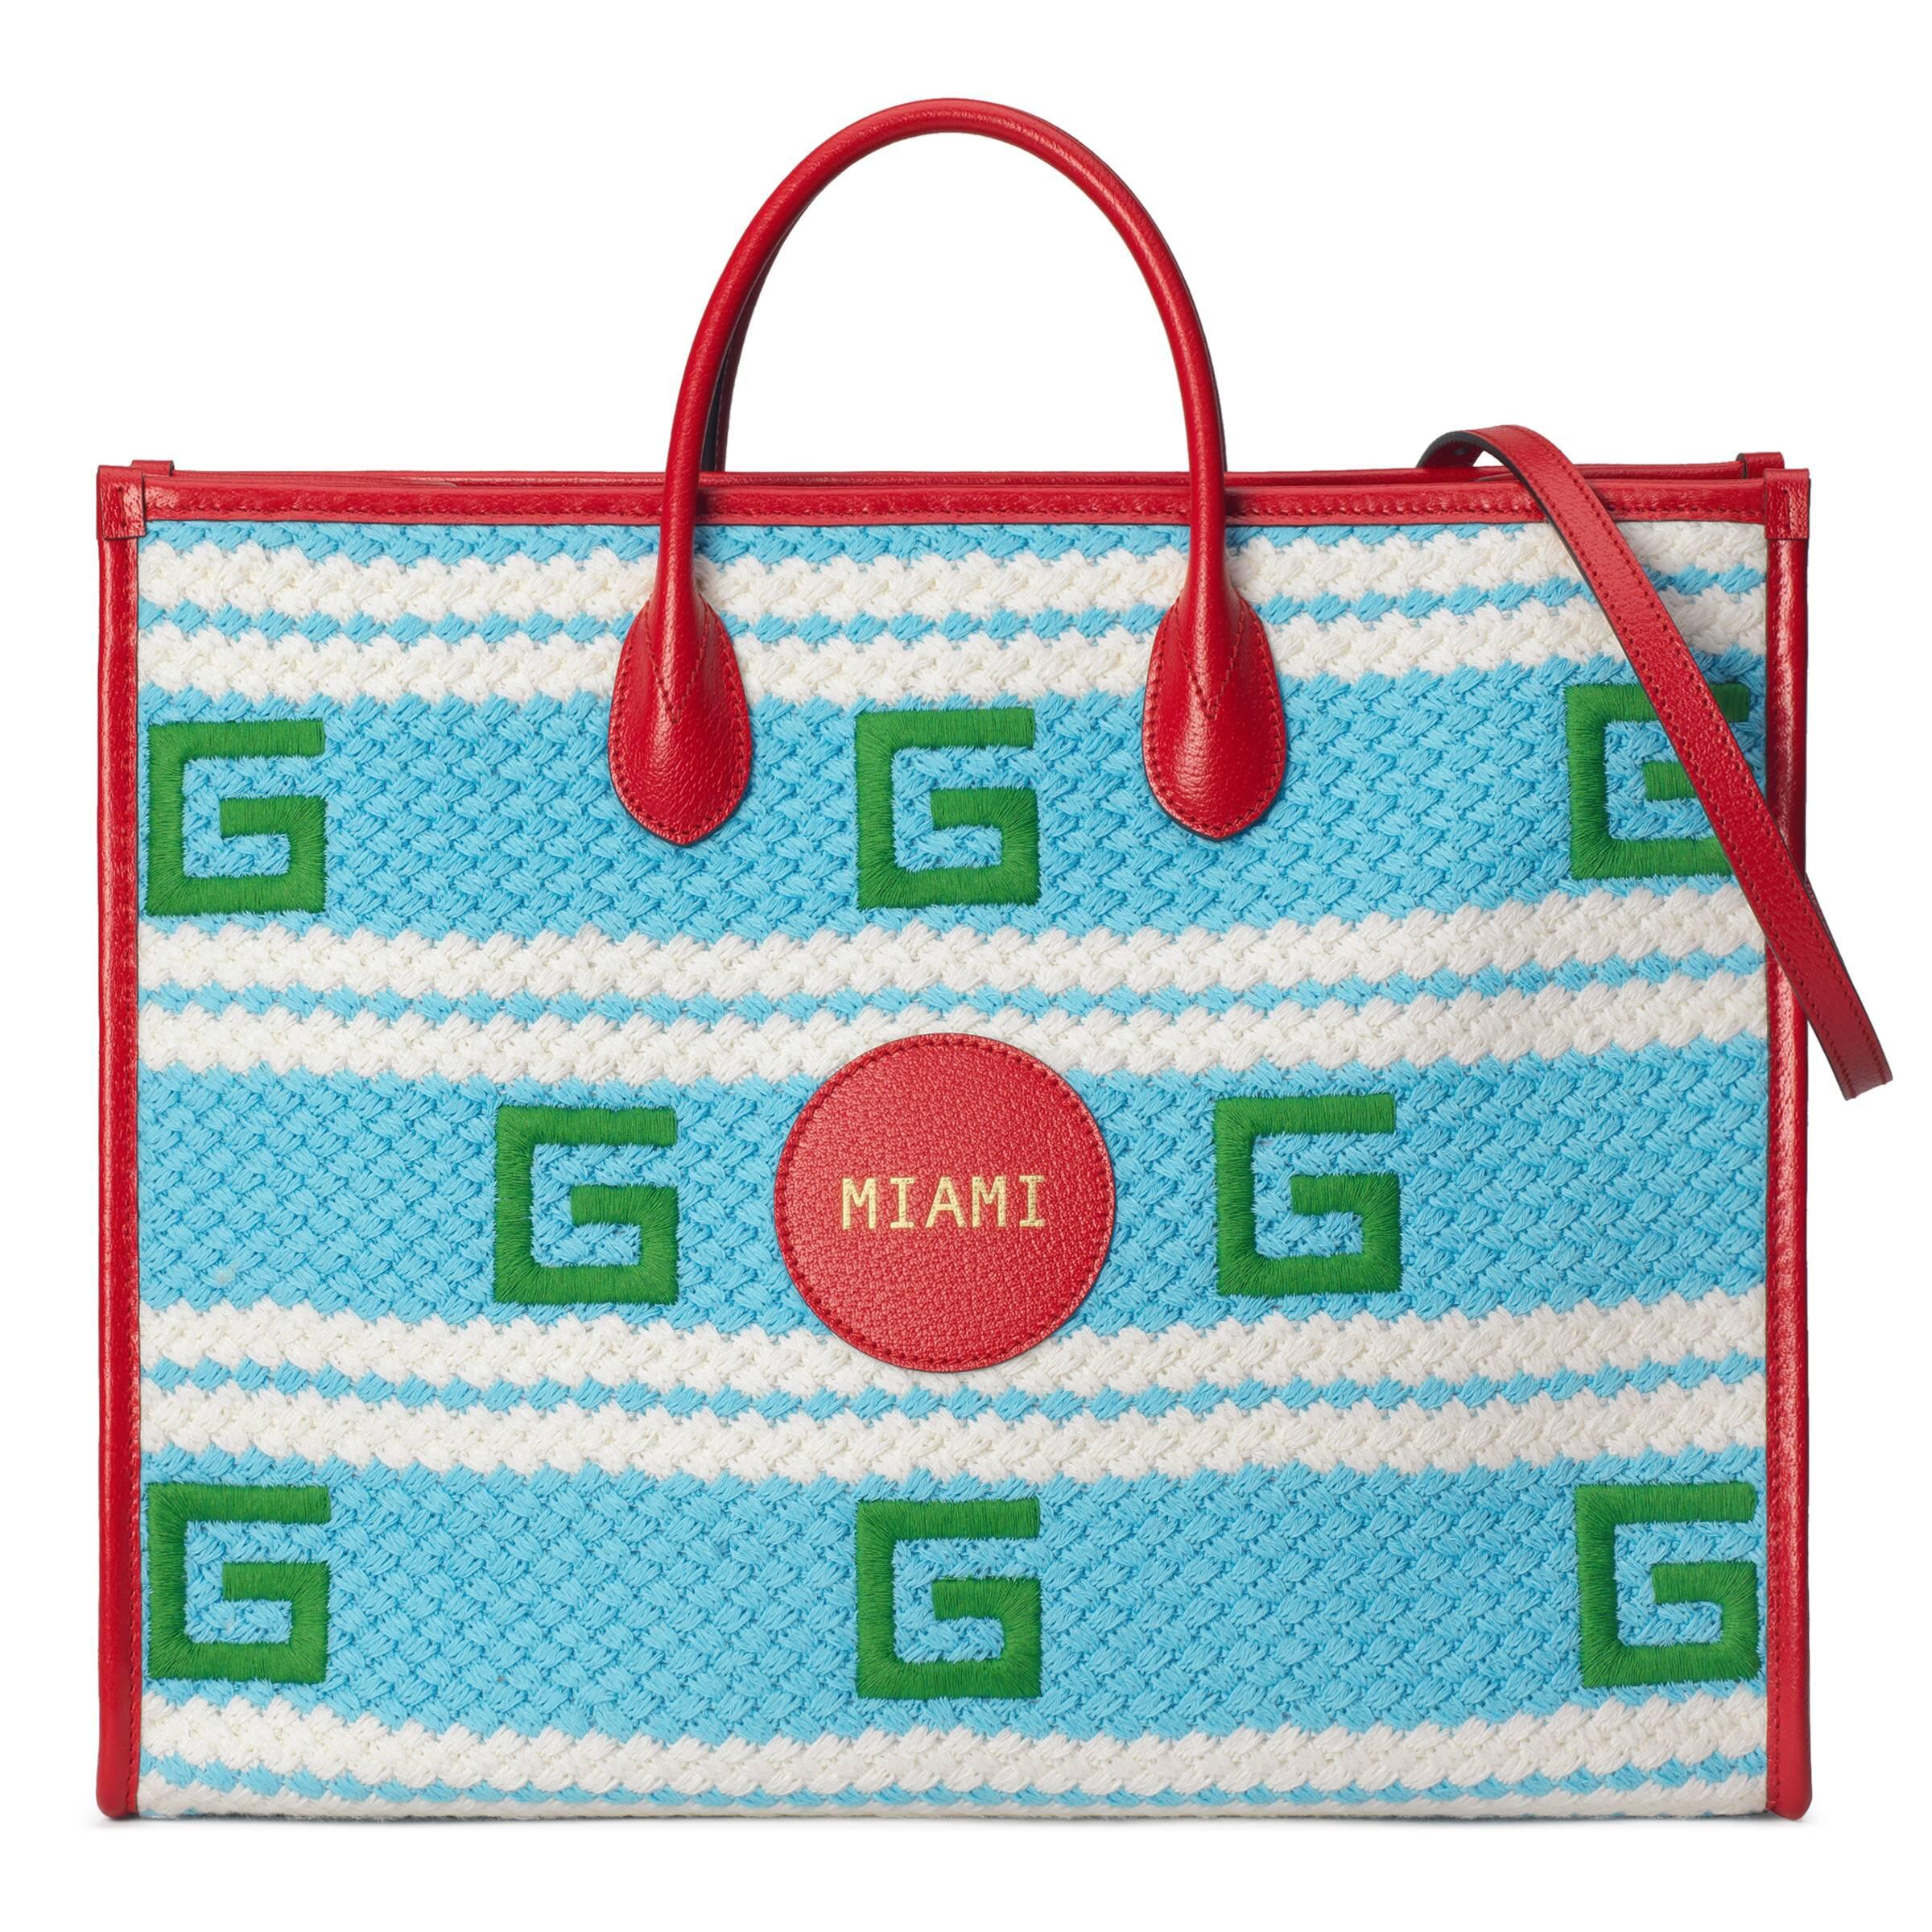 Gucci Everyday Tote Bags